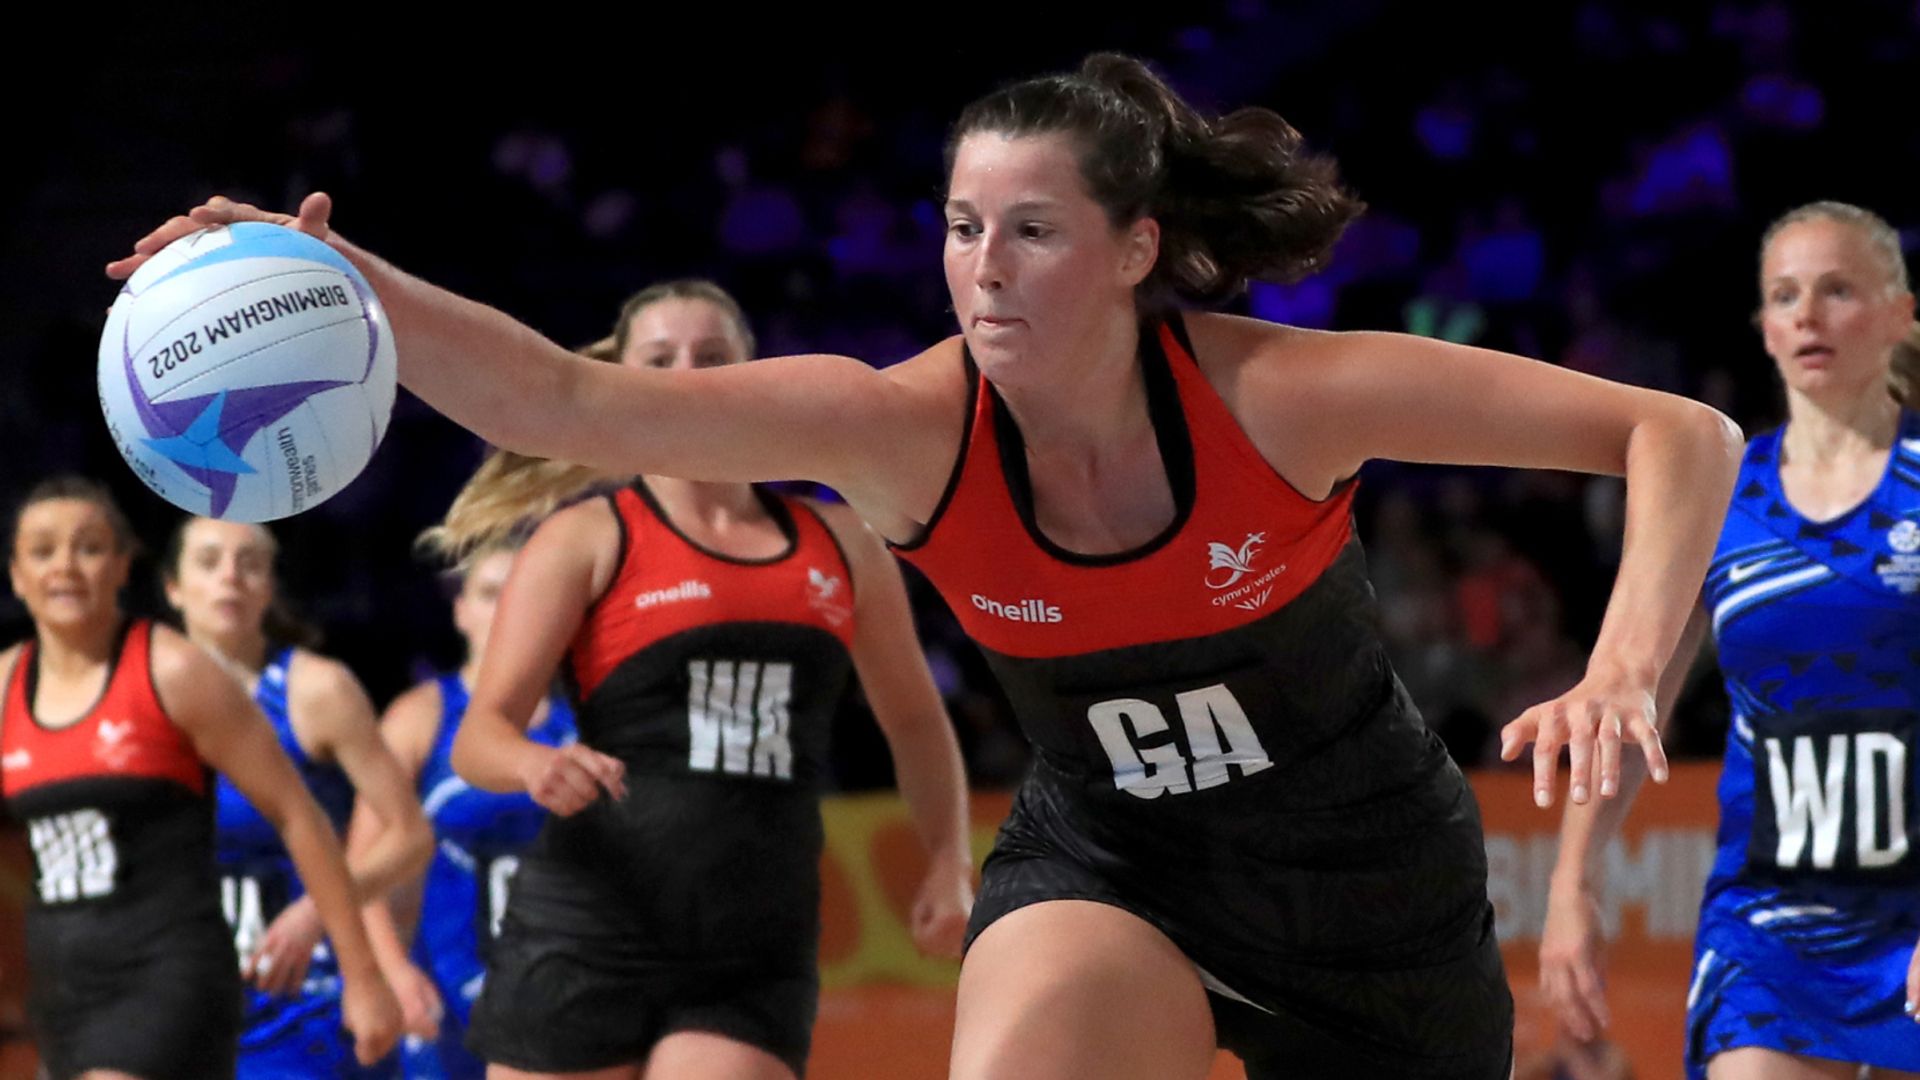 Wales and Scotland qualify for Netball World Cup after European Qualifiers